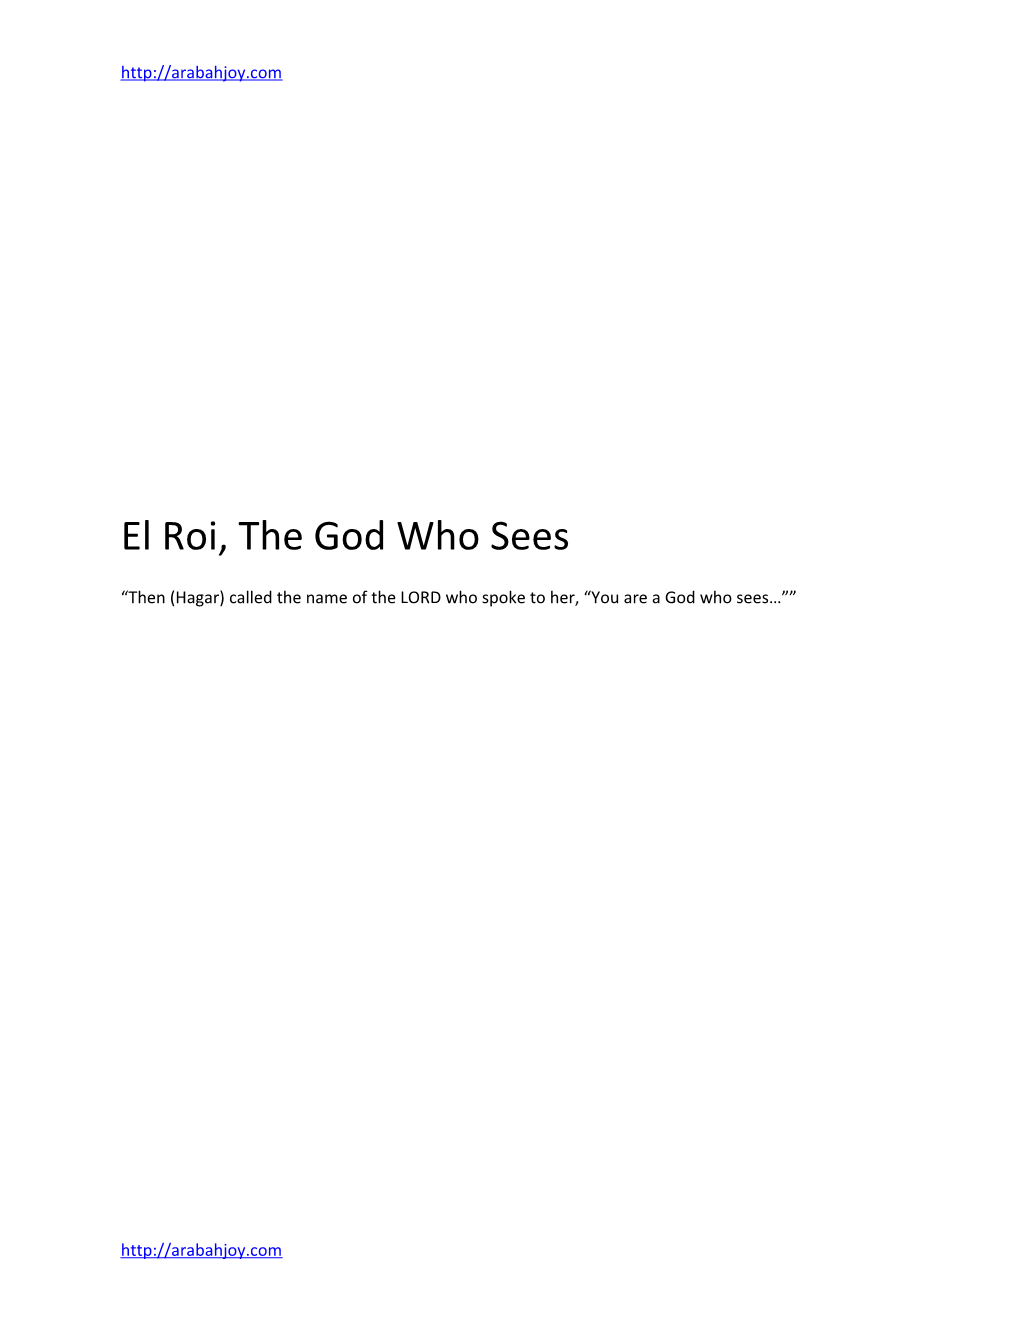 El Roi, the God Who Sees